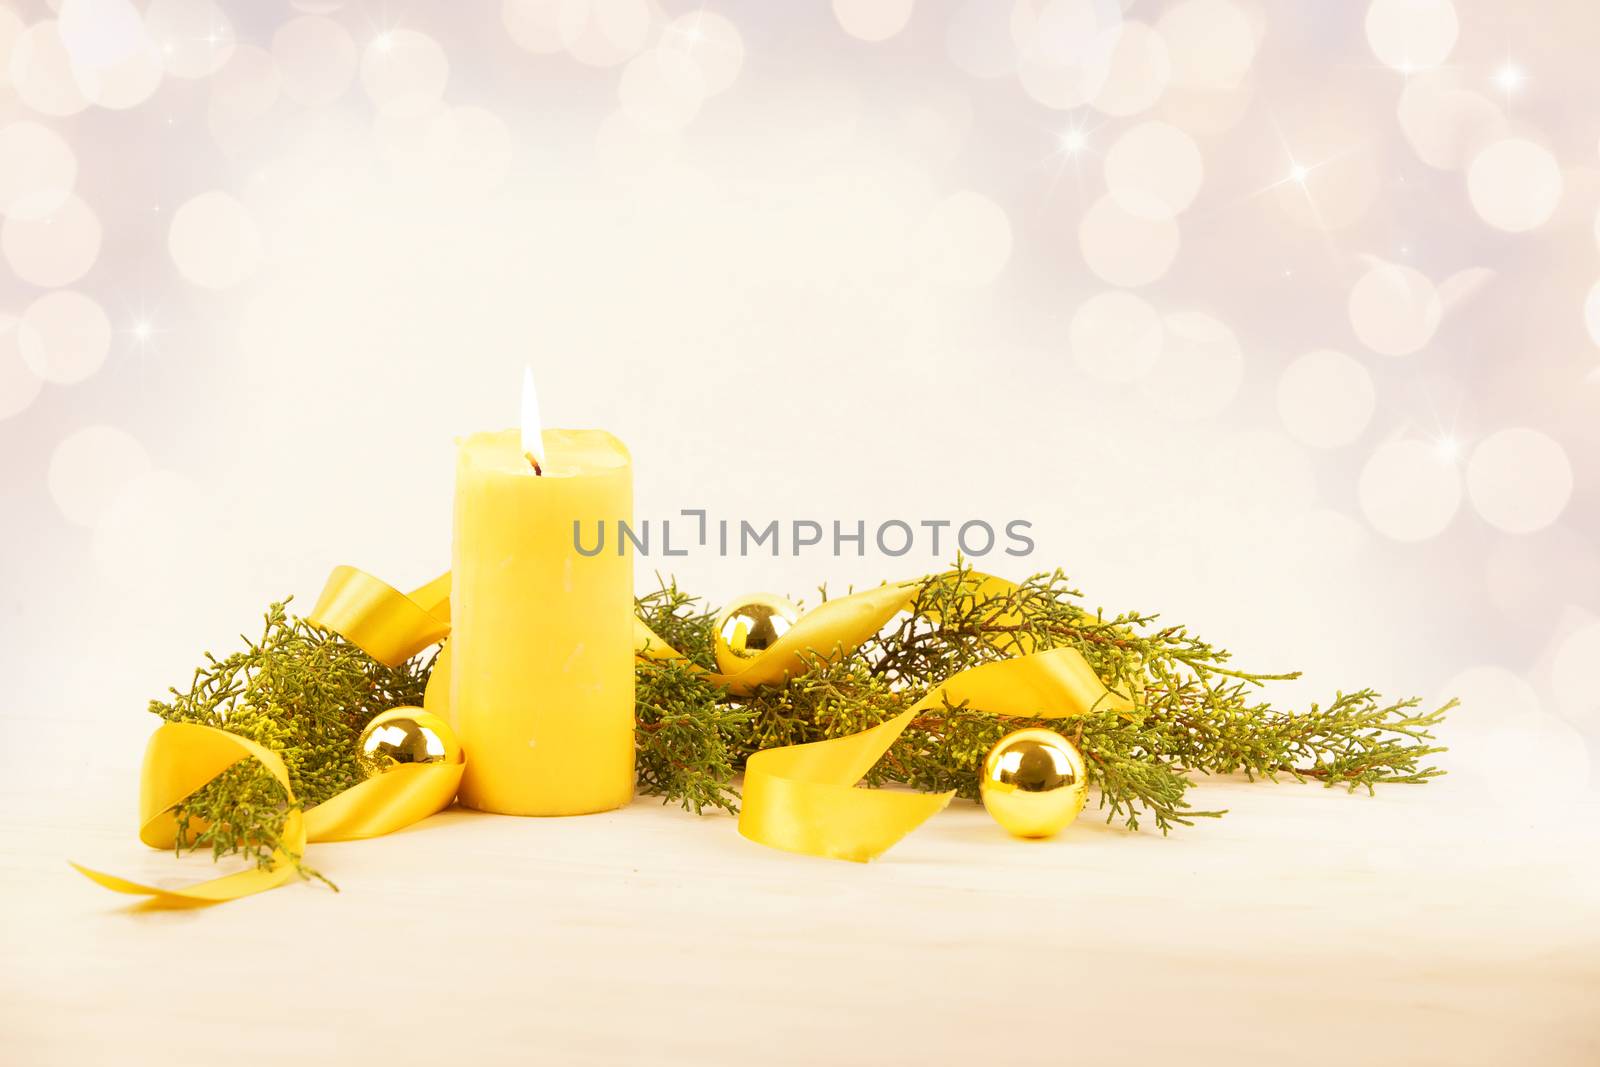 Christmas copy space with a lit yellow candle, pine branches, golden satin ribbon and gold-colored Christmas balls on a light patterned background